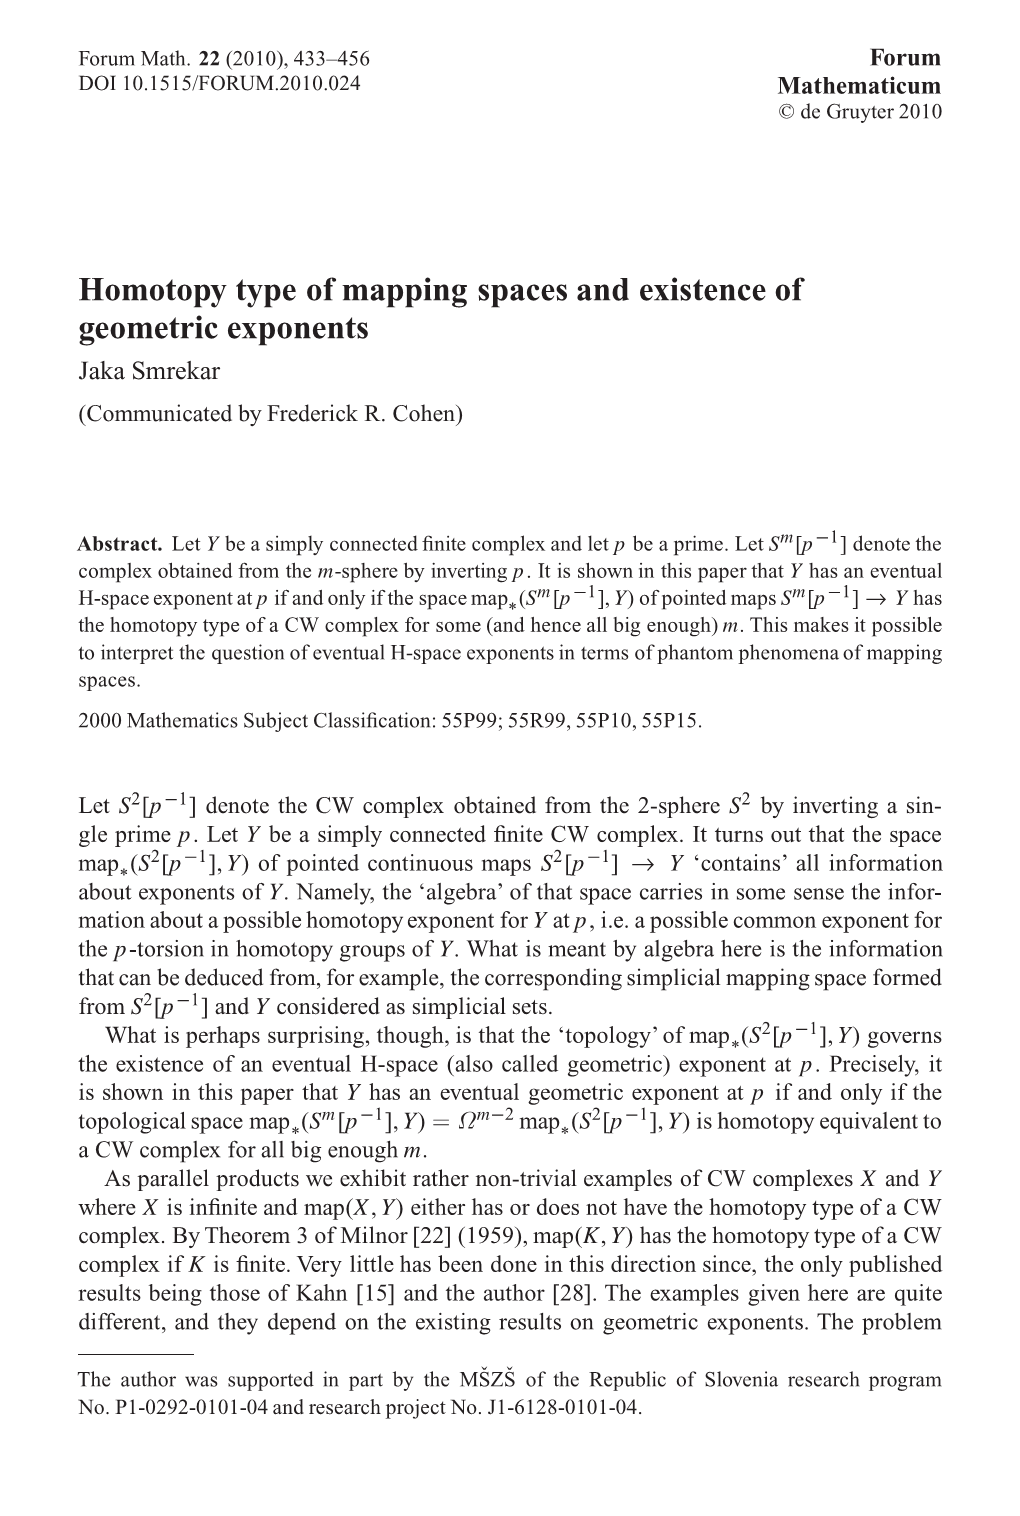 Homotopy Type of Mapping Spaces and Existence of Geometric Exponents Jaka Smrekar (Communicated by Frederick R